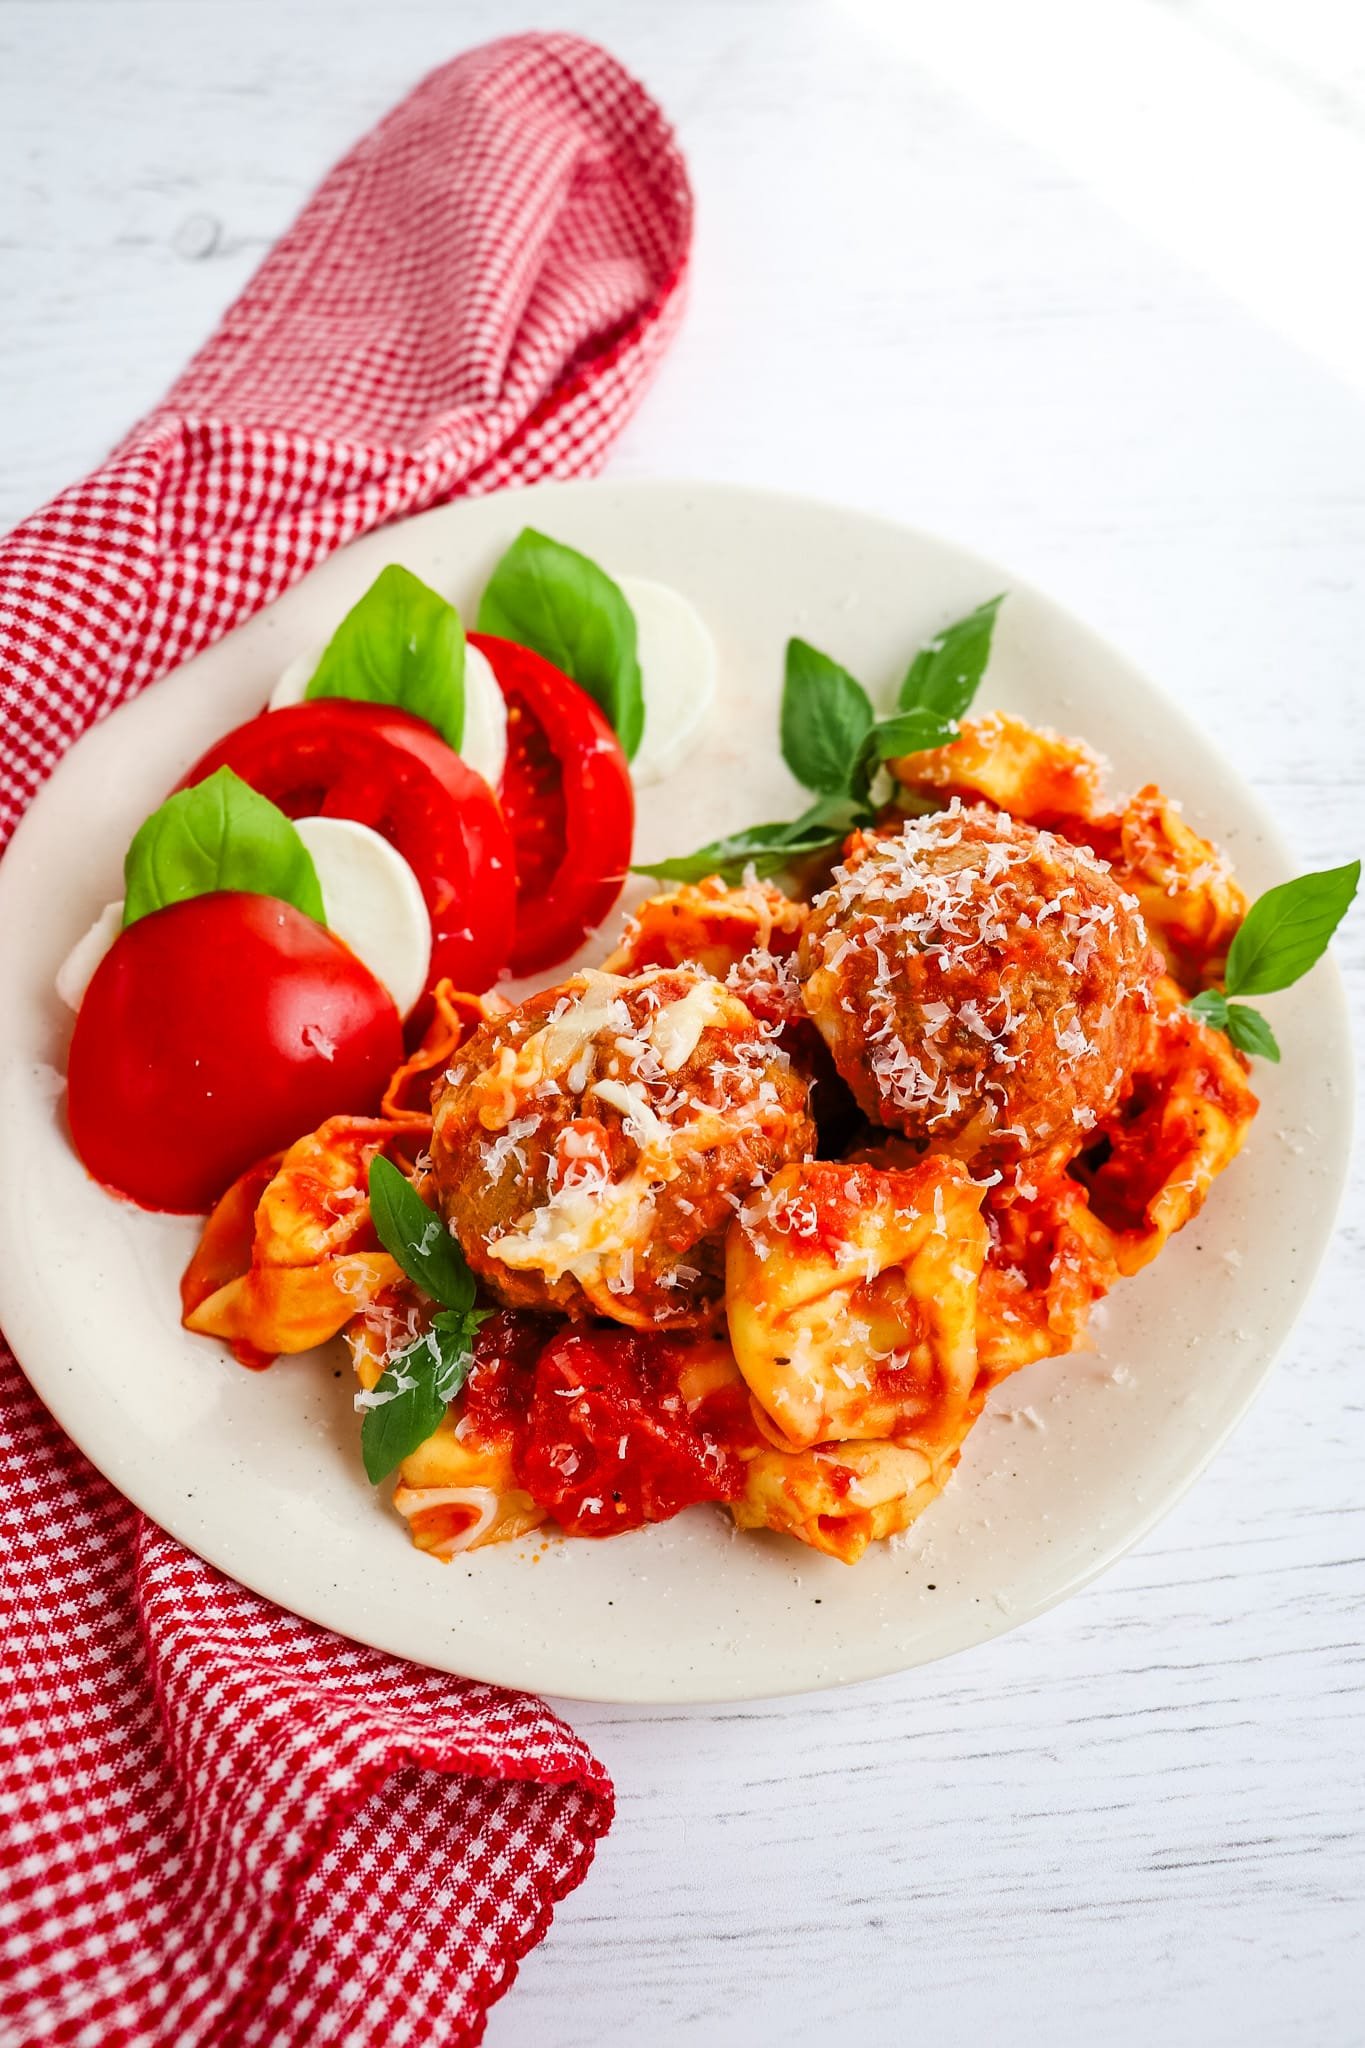 Tortellini and meatball marinara garnished with fresh basil leaves and caprese salad on the side.